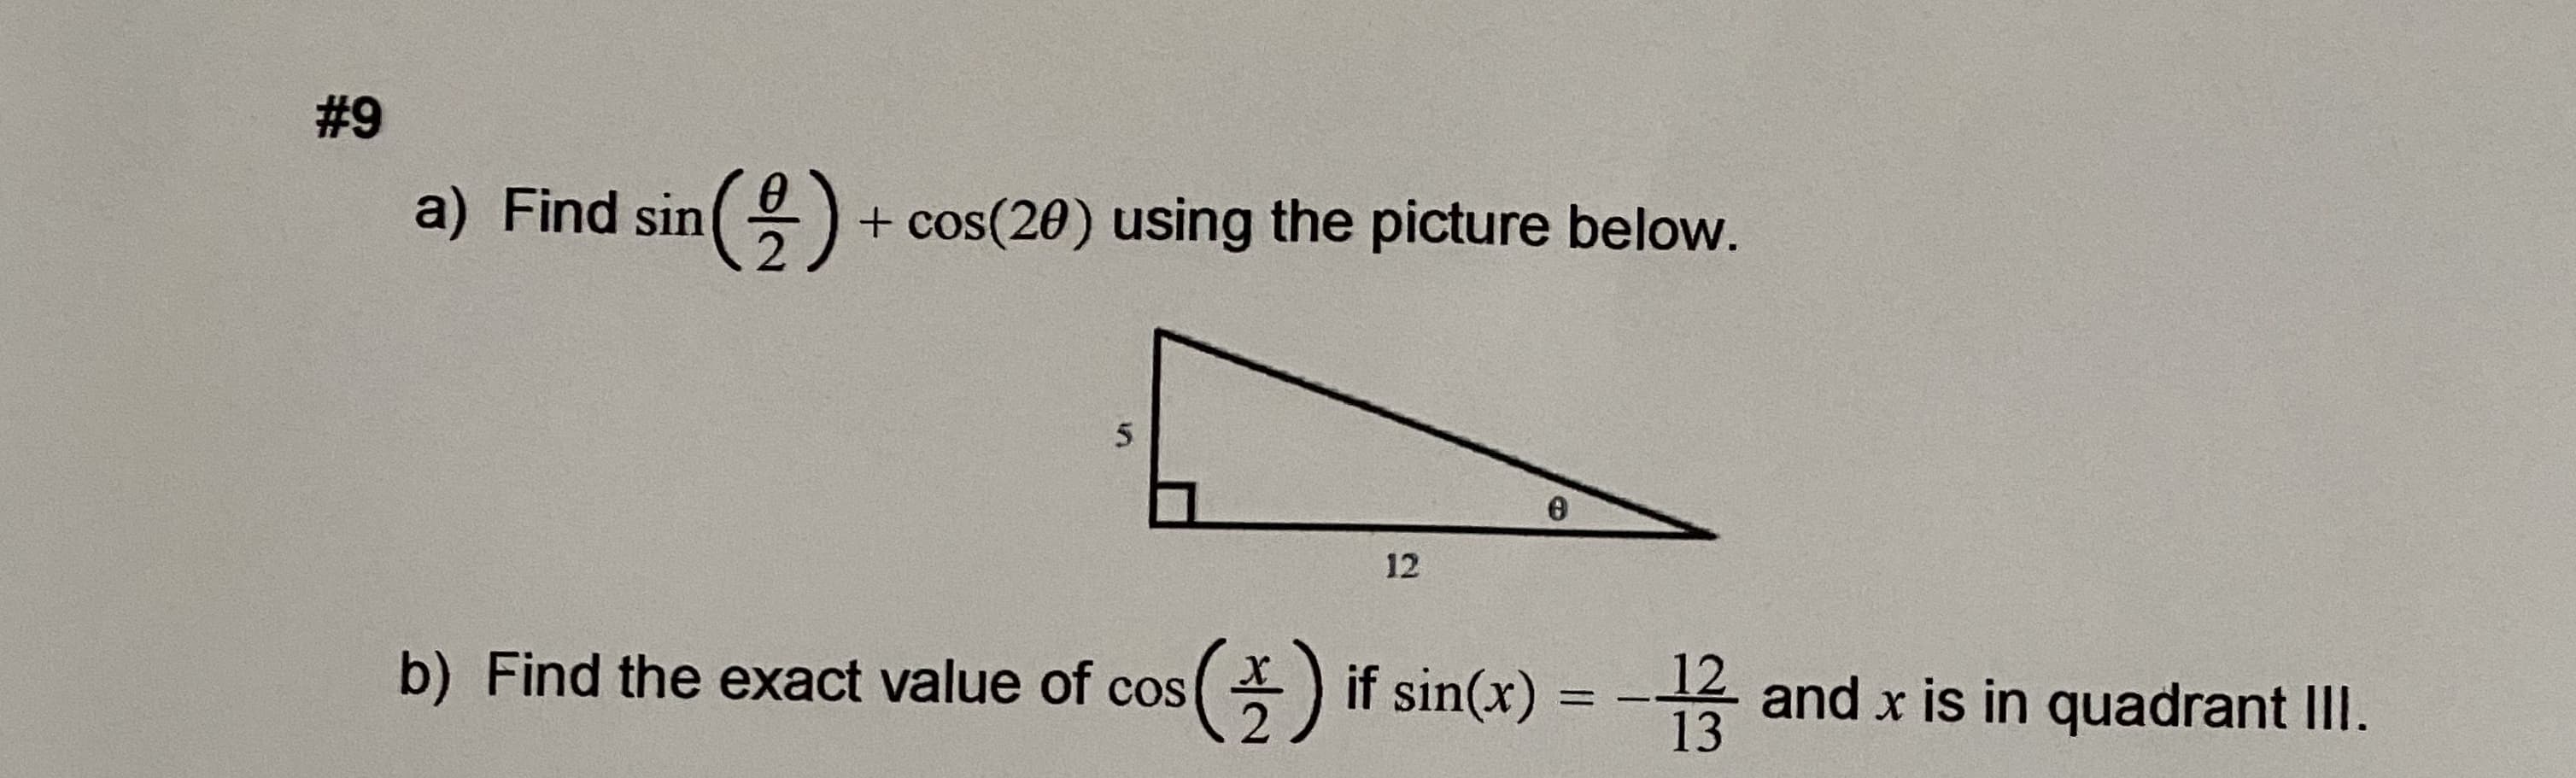 Find sin() + cos(20) using the picture below.
12
Find the exact value of cos
*) if sin(x)
12
13
and x is in quadrant III.
%3D
